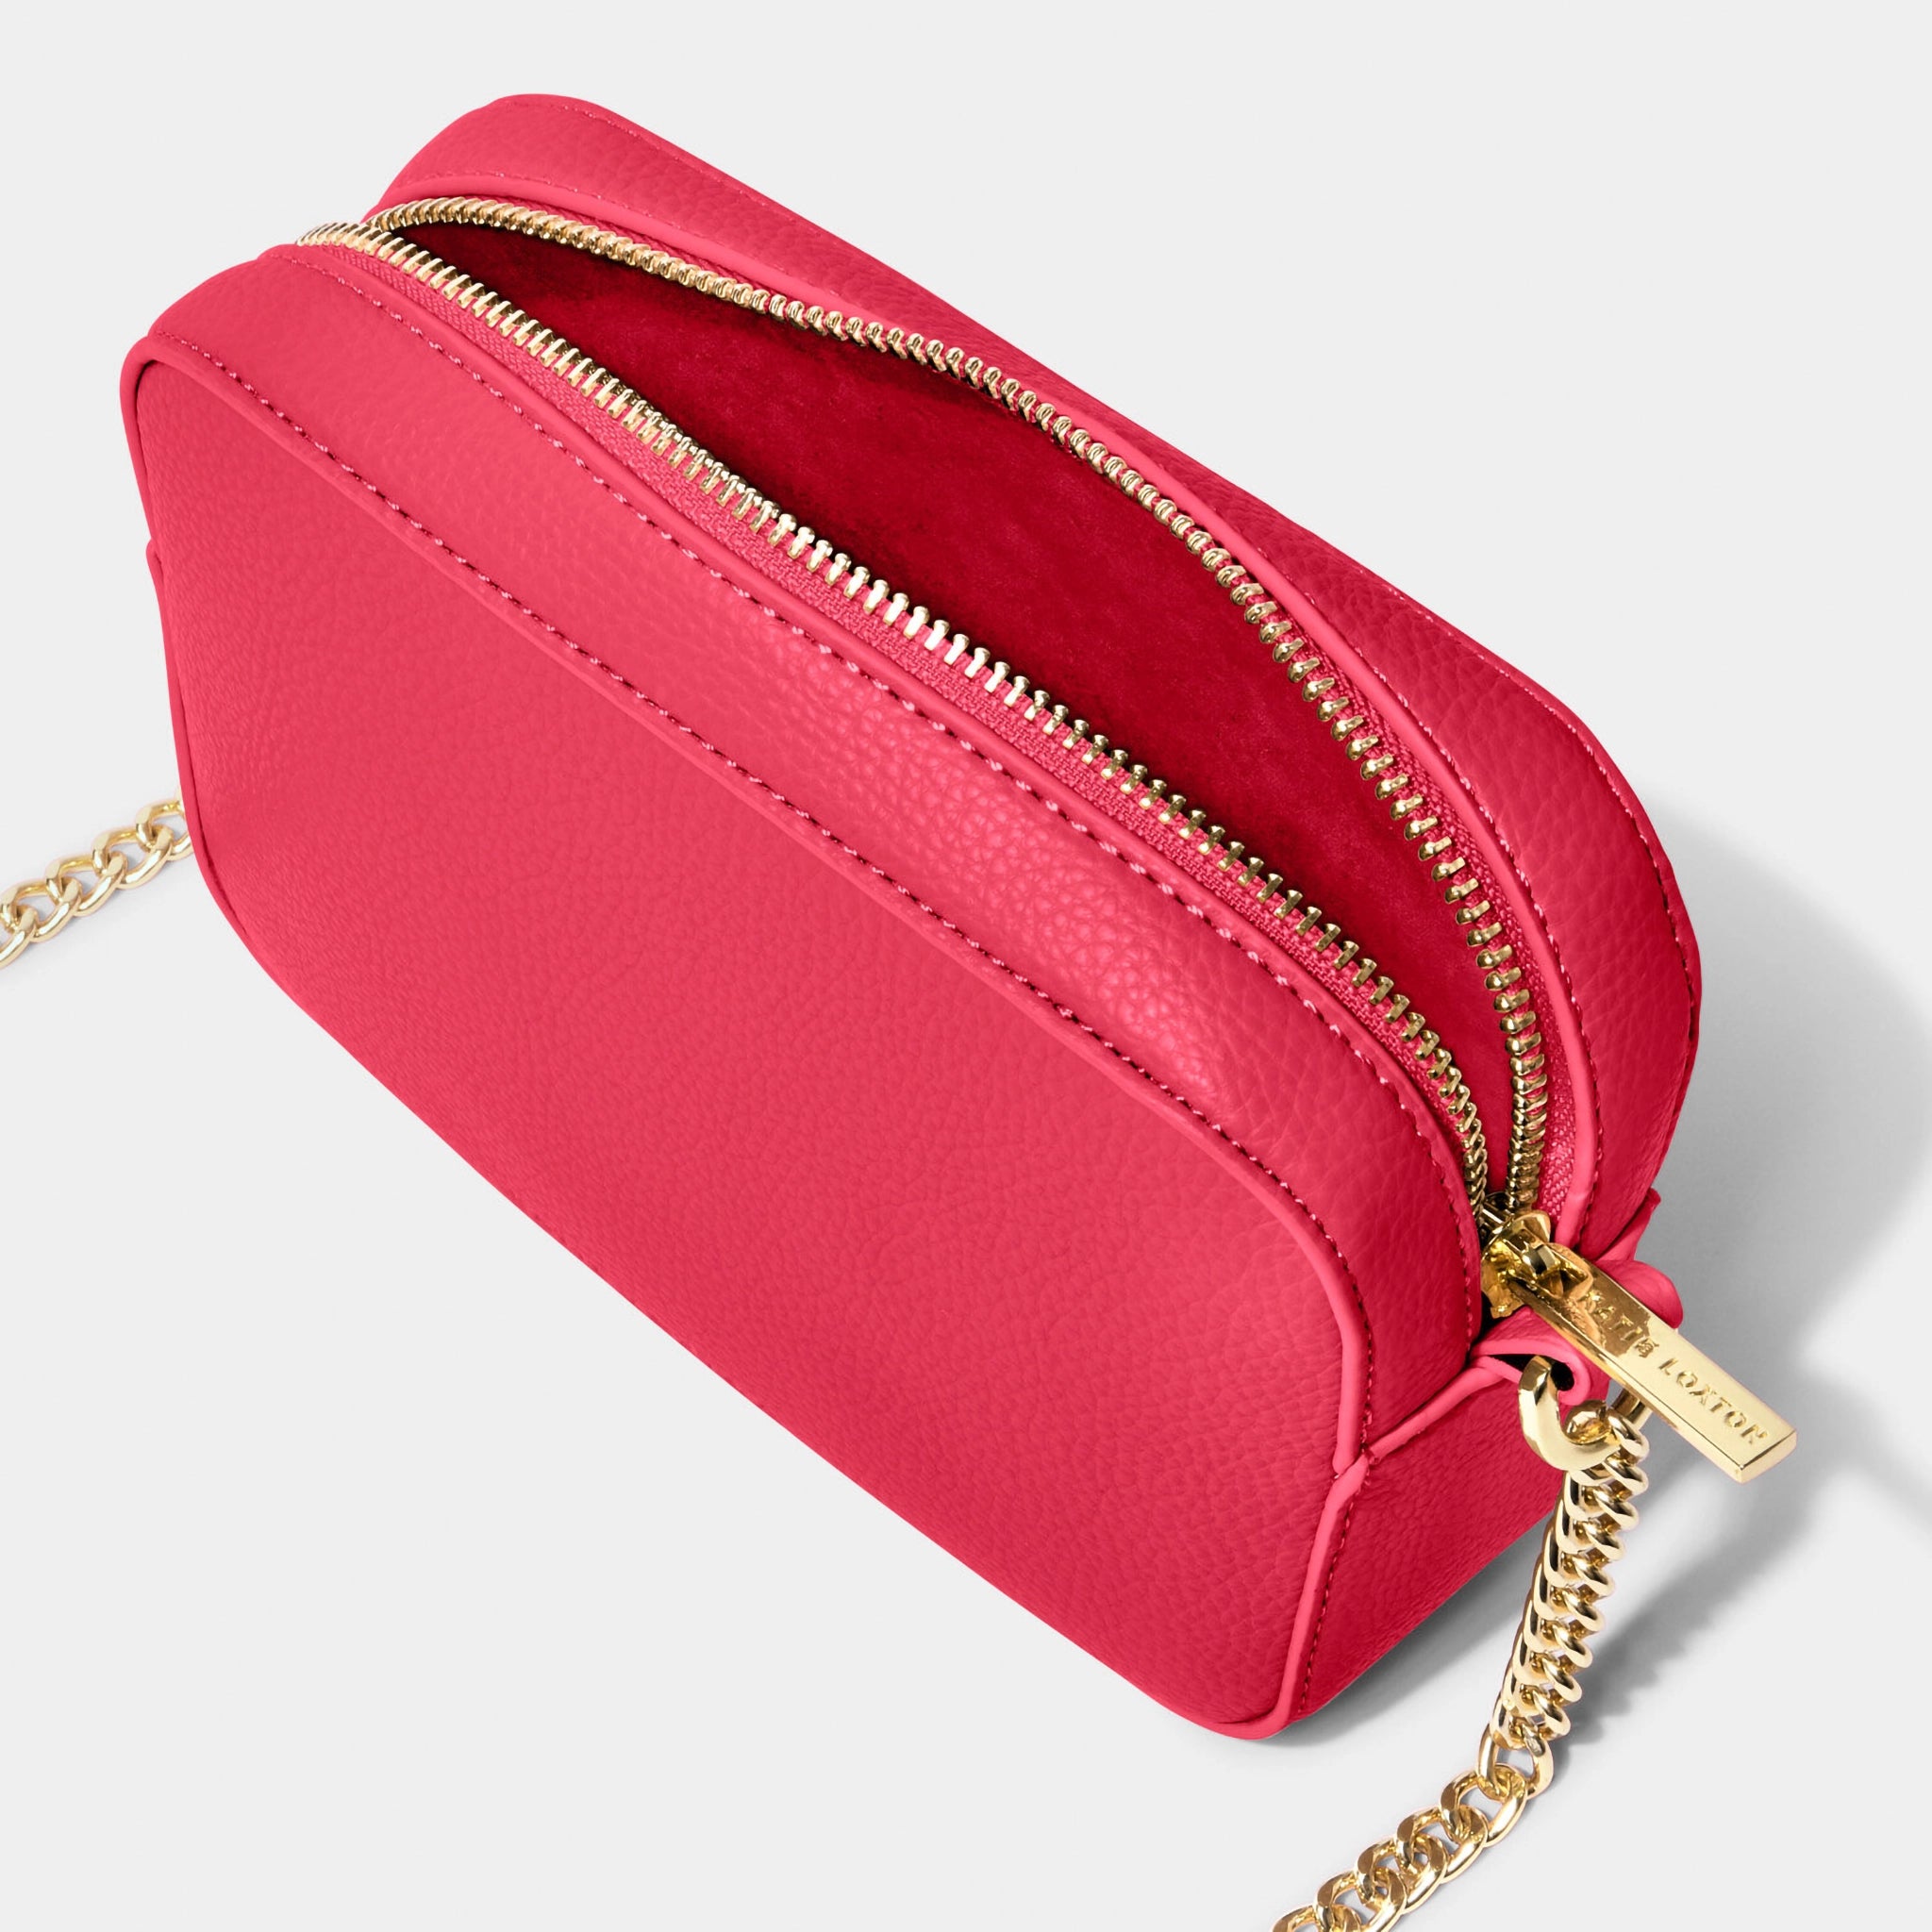 An open fuchsia camera bag with gold chain detail on the strap, textured leather and a zip top